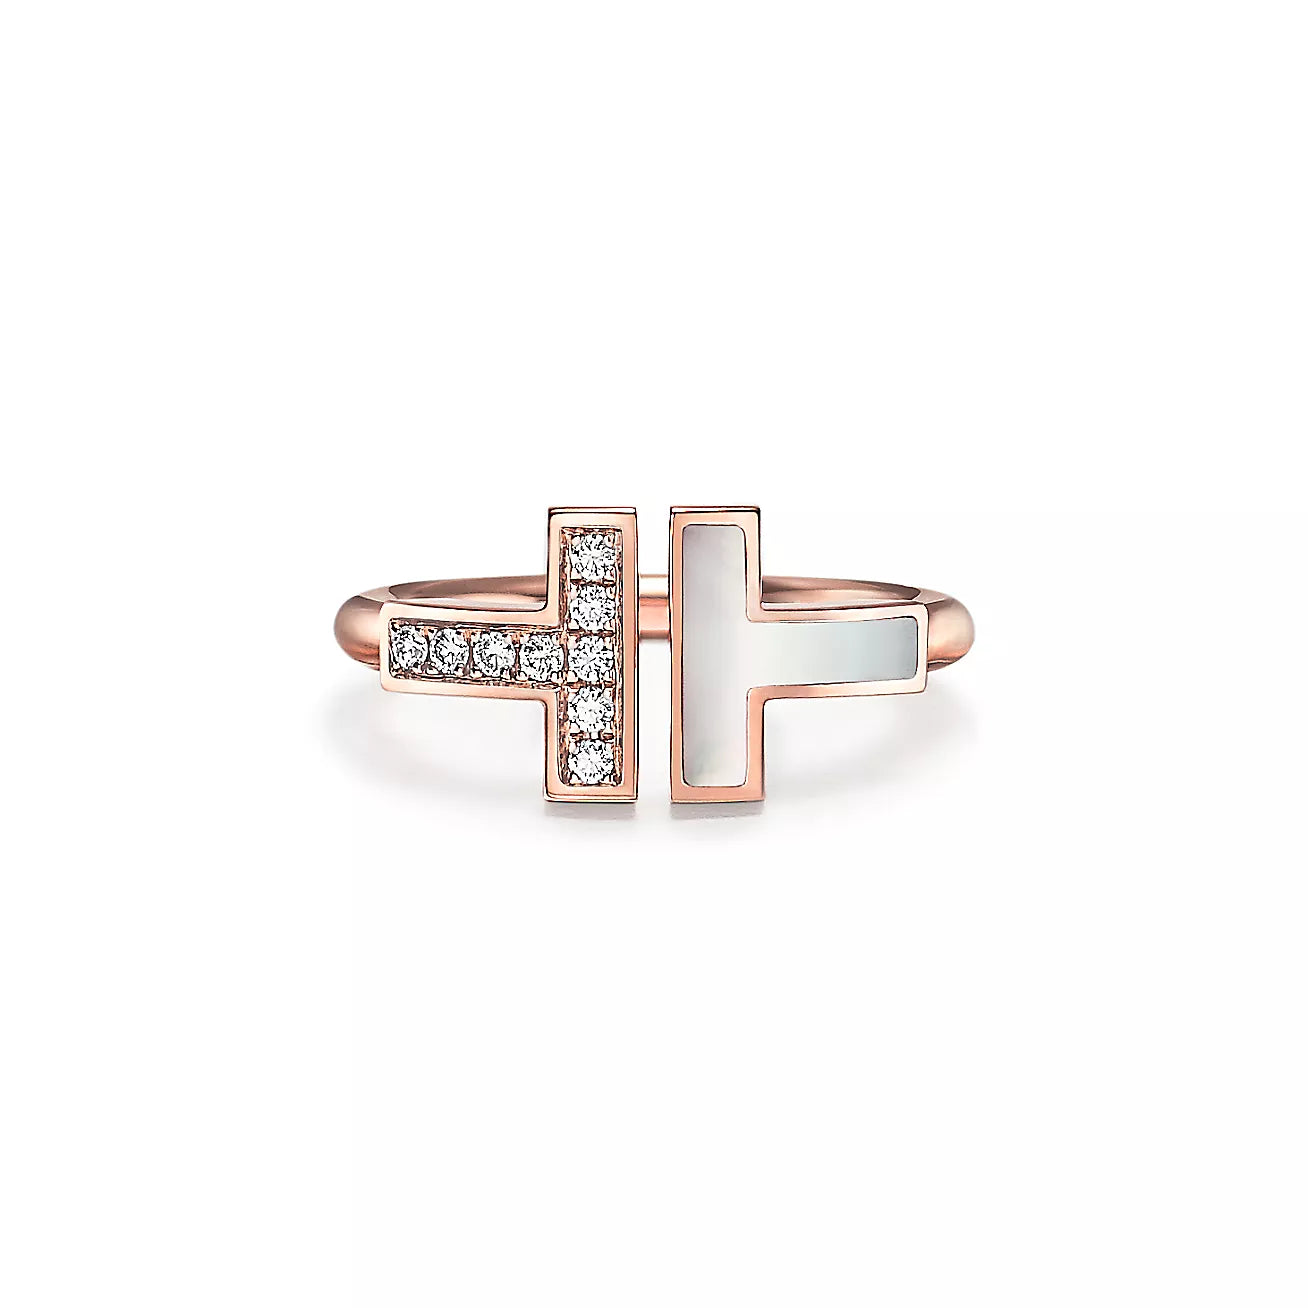 Tiffany T Wire Ring in Rose Gold with Diamonds and Mother-of-pearl